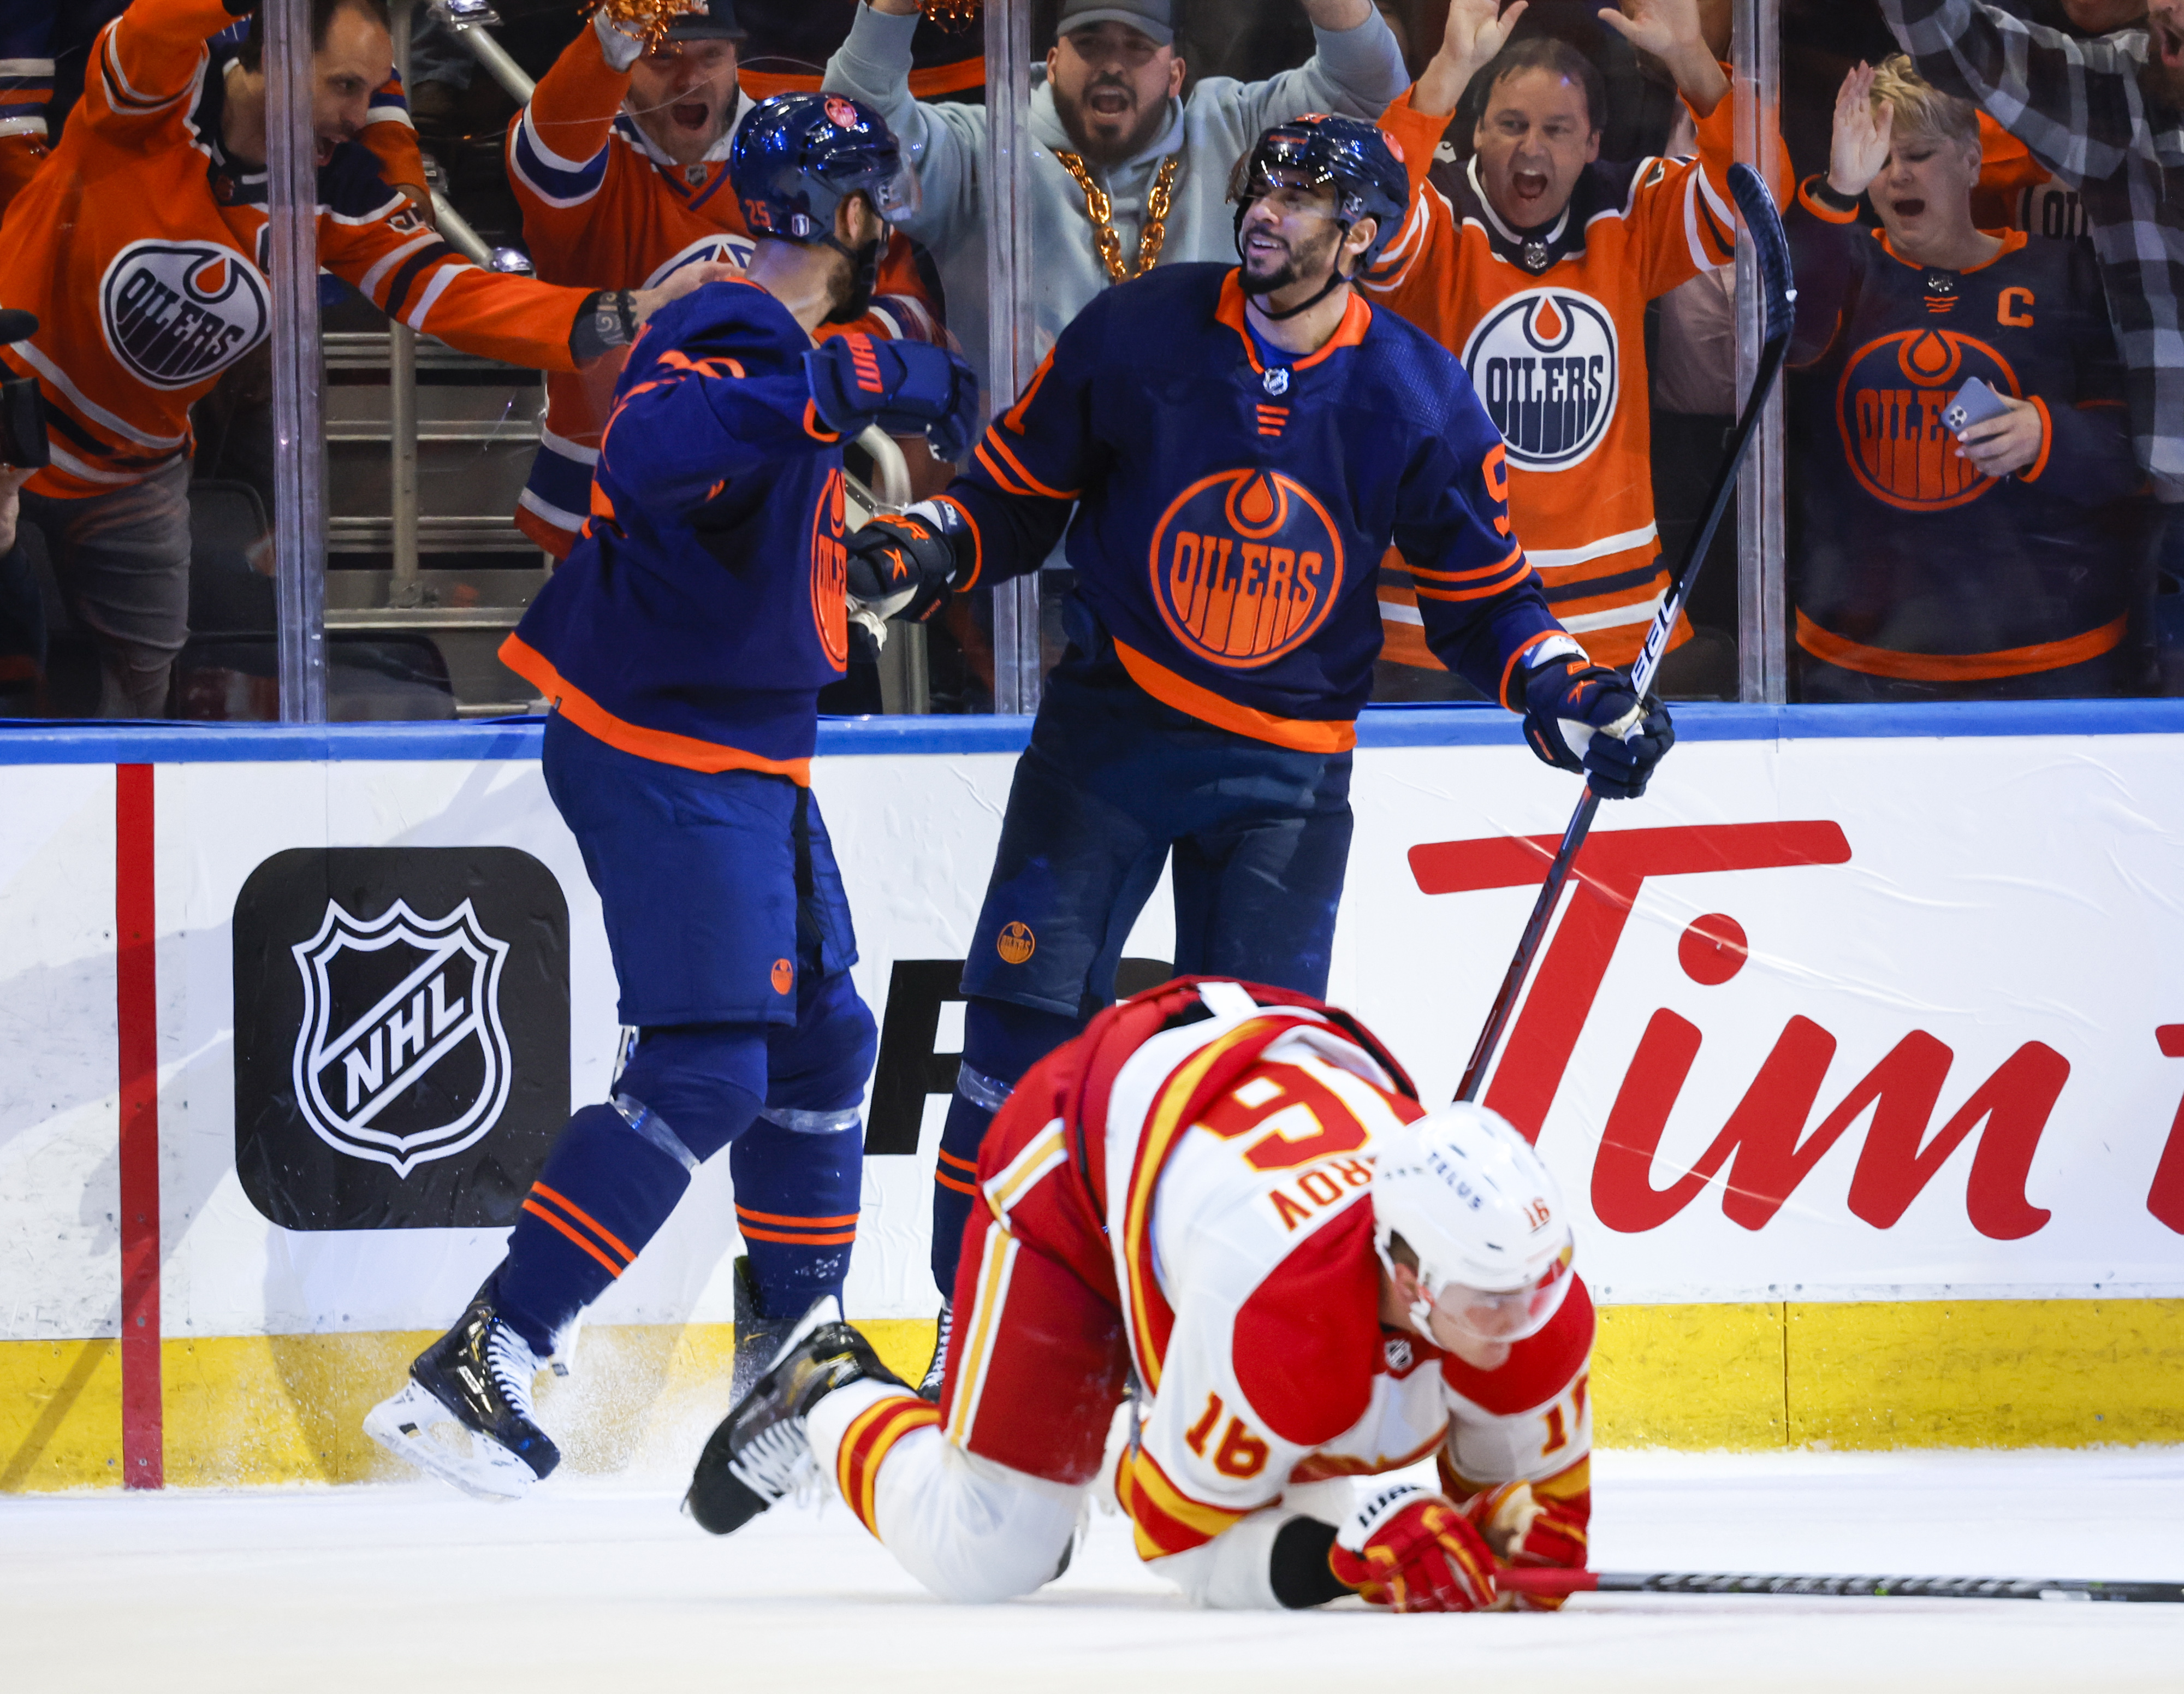 Kane nets hat trick as Oilers thump Flames 4-1 to take 2-1 playoff series  lead - Castlegar News